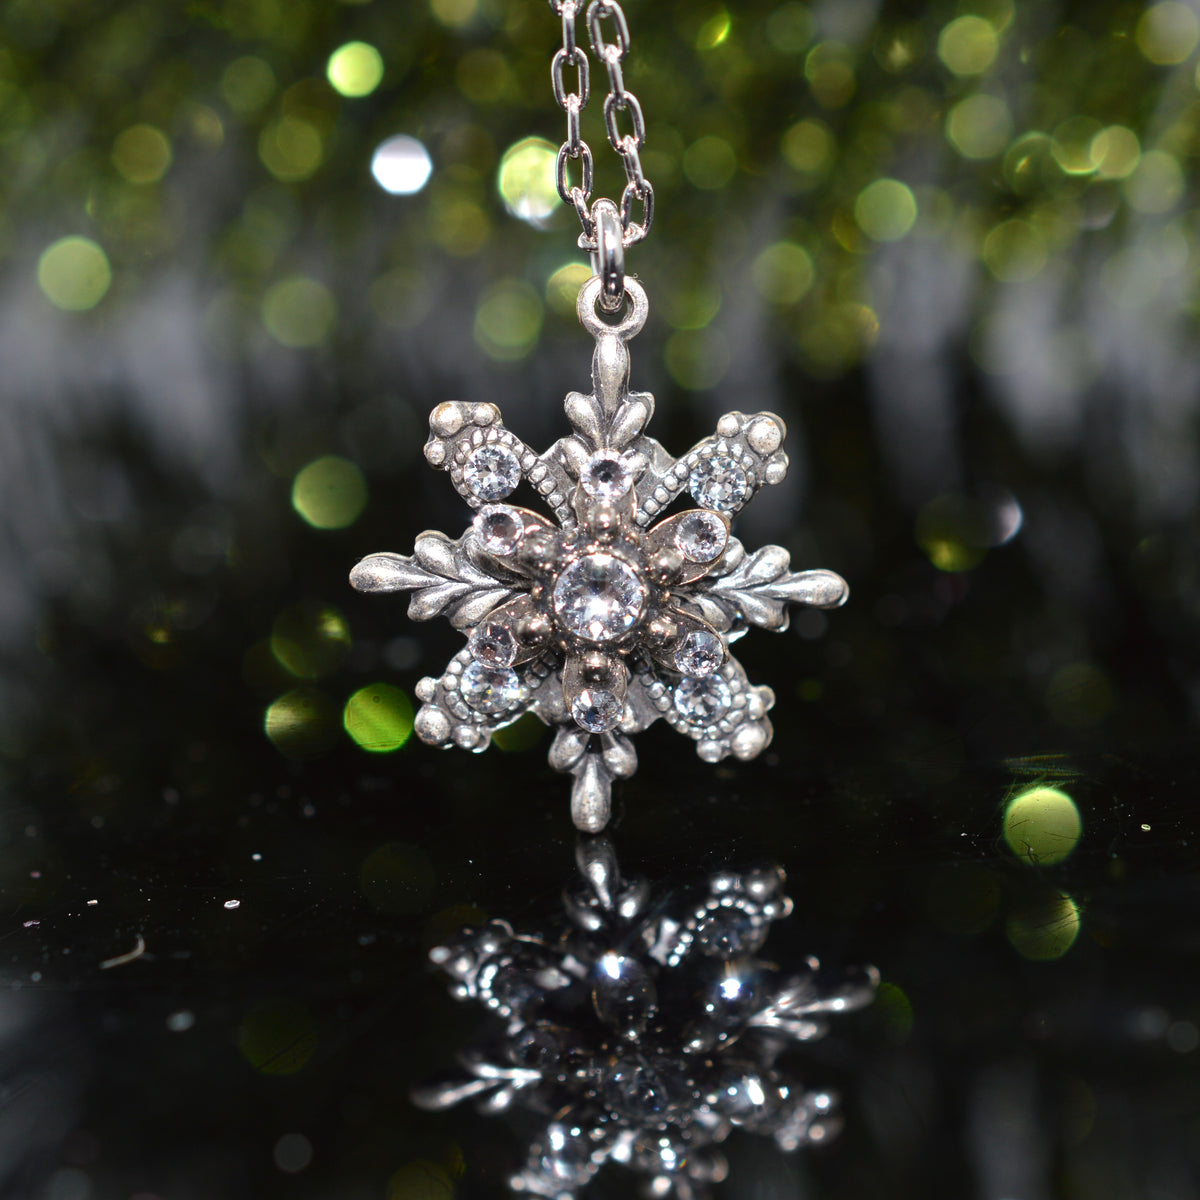 Antique Silver Plated Crystal Snowflake Pendant by Firefly